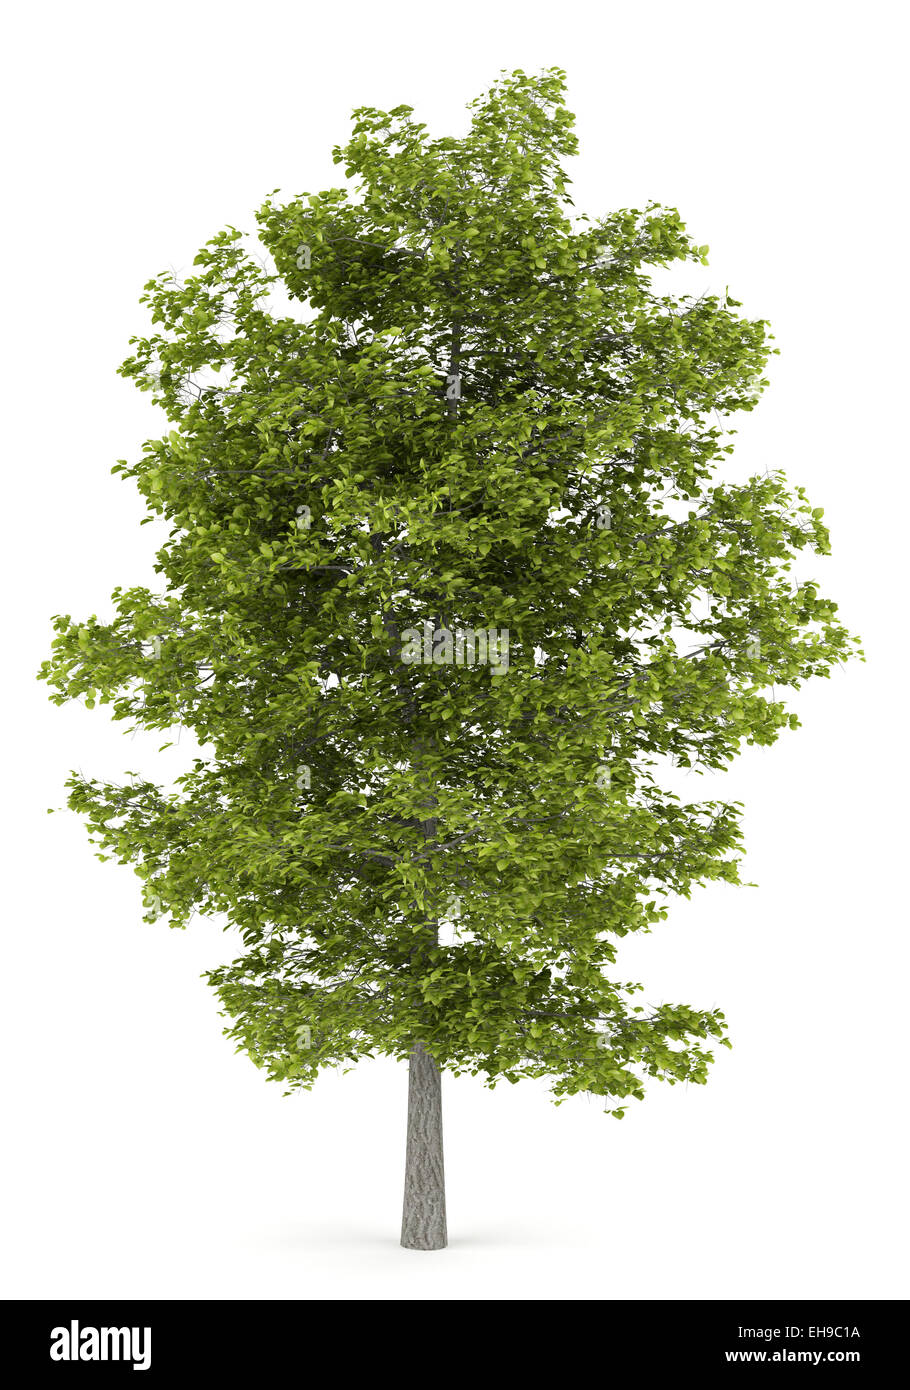 common lime tree isolated on white background Stock Photo